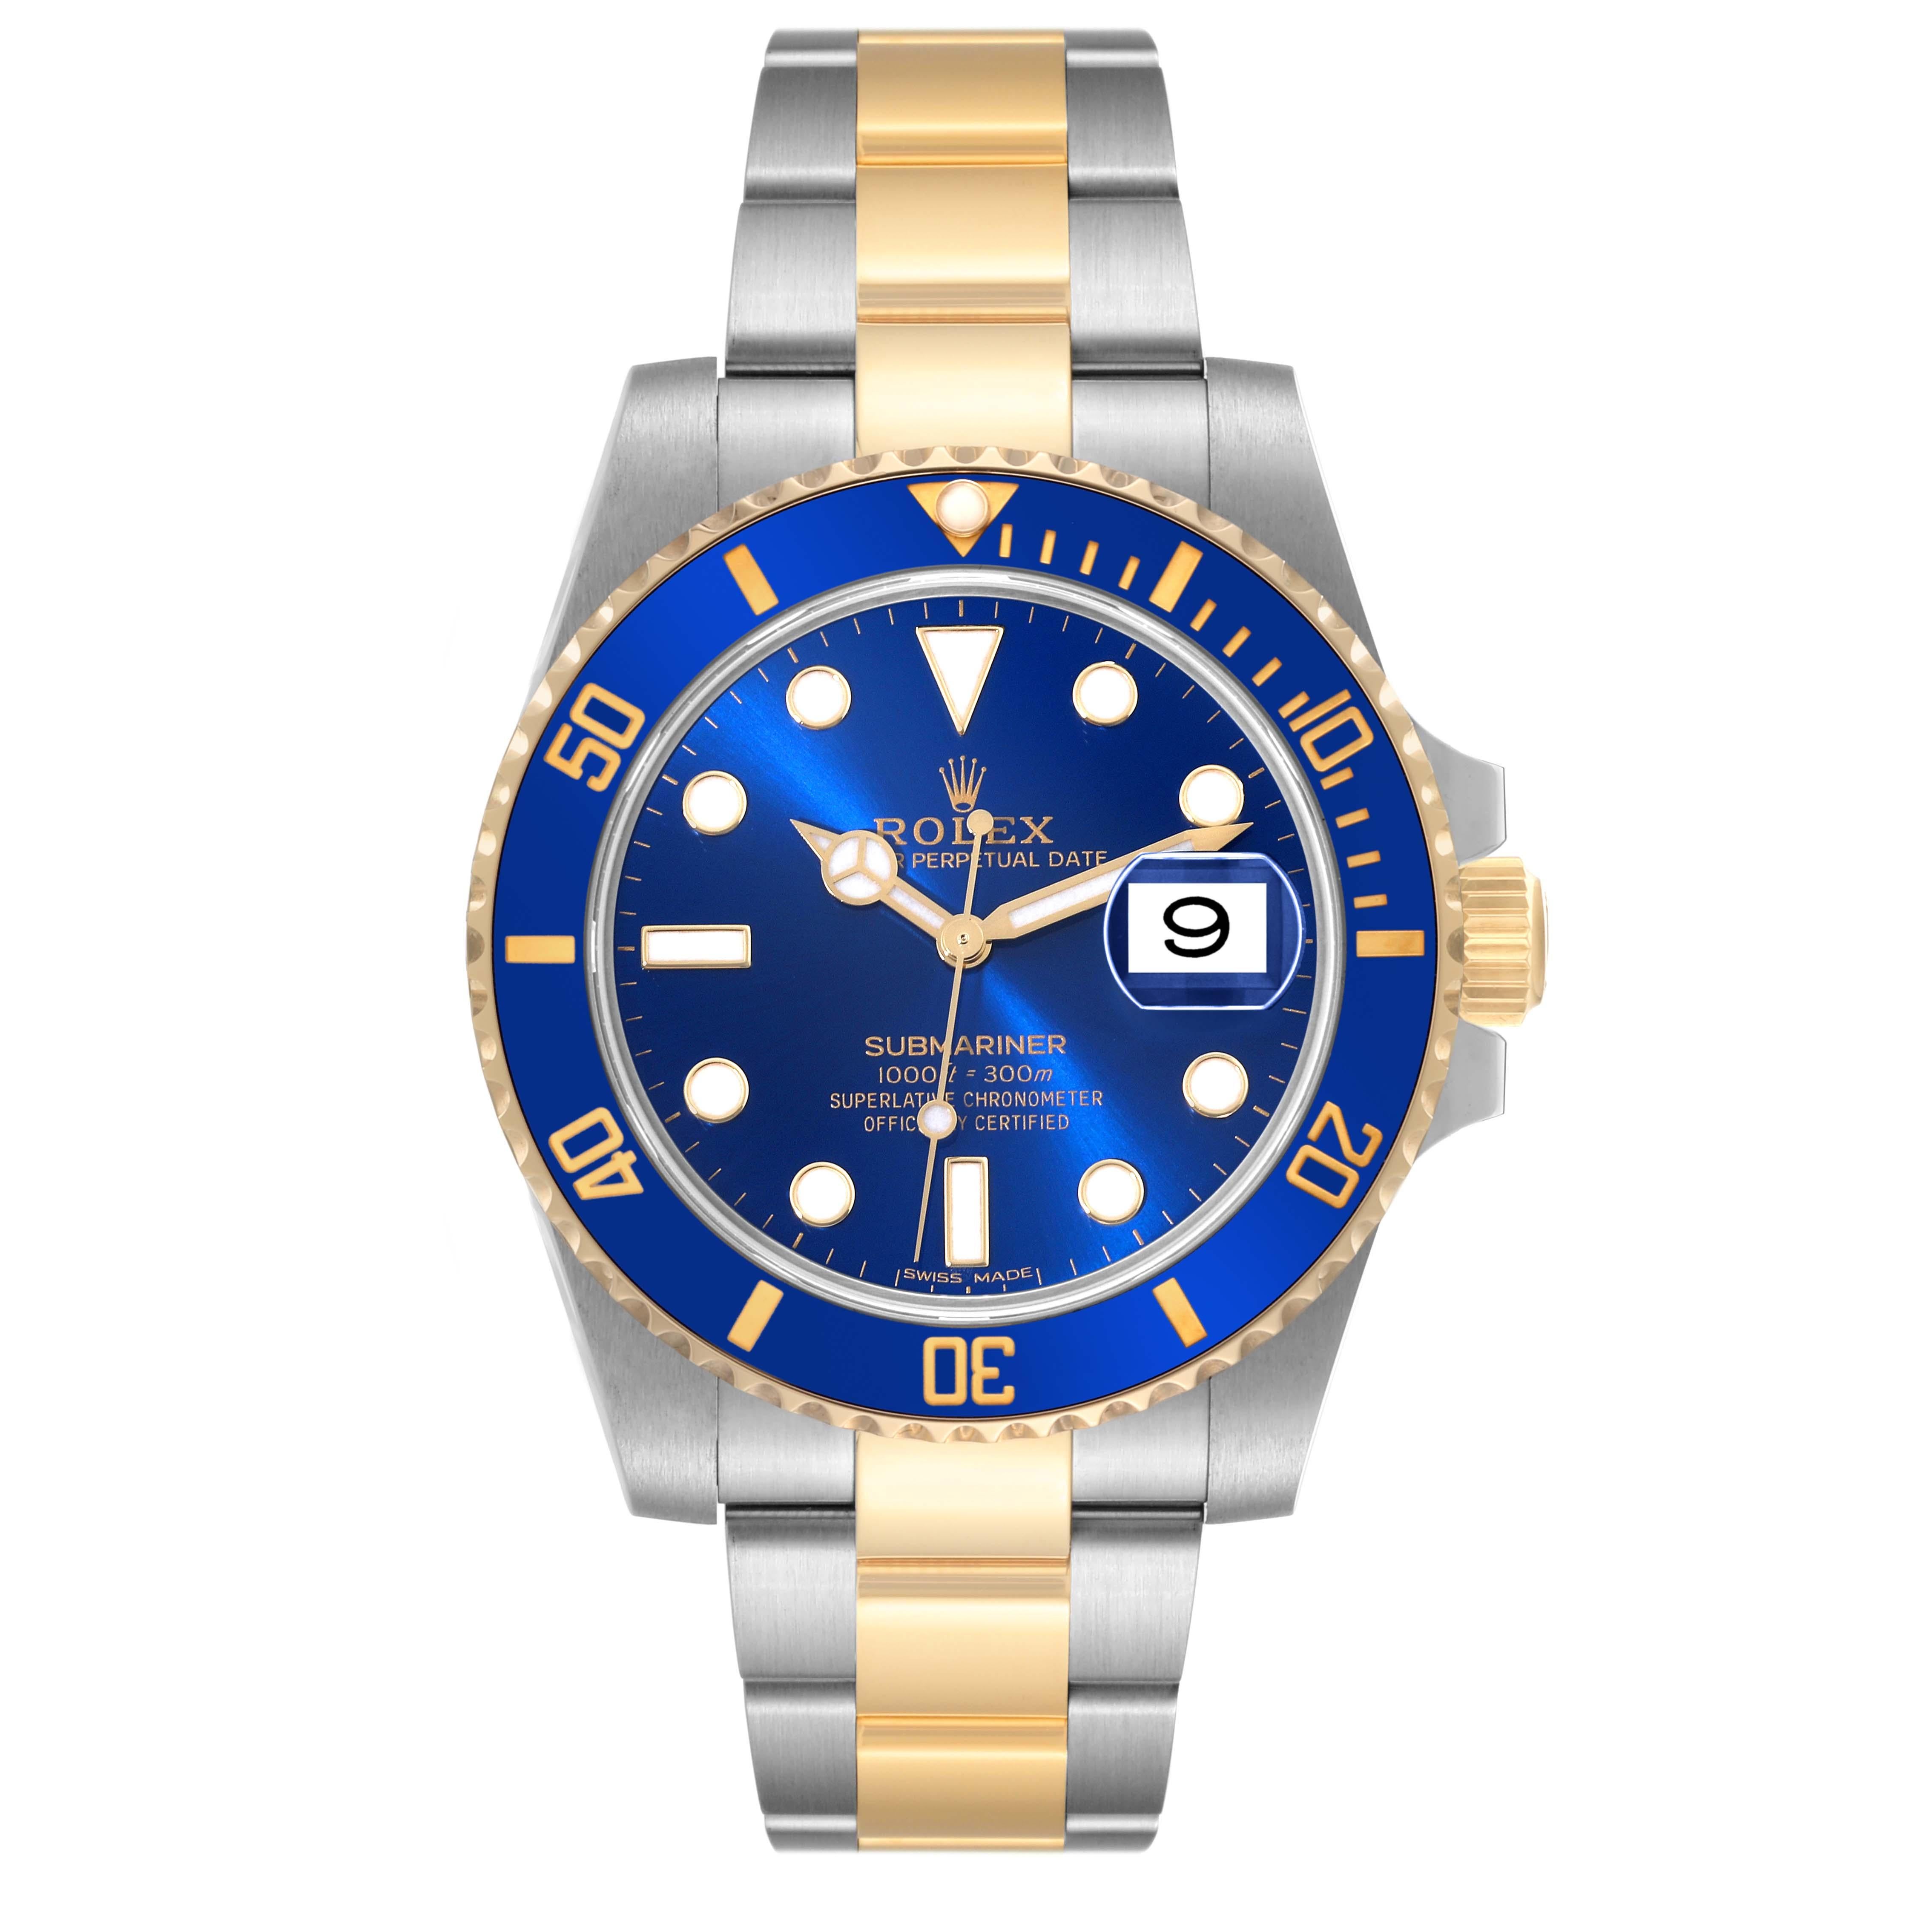 Rolex Submariner Steel Yellow Gold Blue Dial Mens Watch 116613 Box Card. Officially certified chronometer self-winding movement. Stainless steel and 18k yellow gold case 40.0 mm in diameter. Rolex logo on the crown. Ceramic blue Ion-plated special